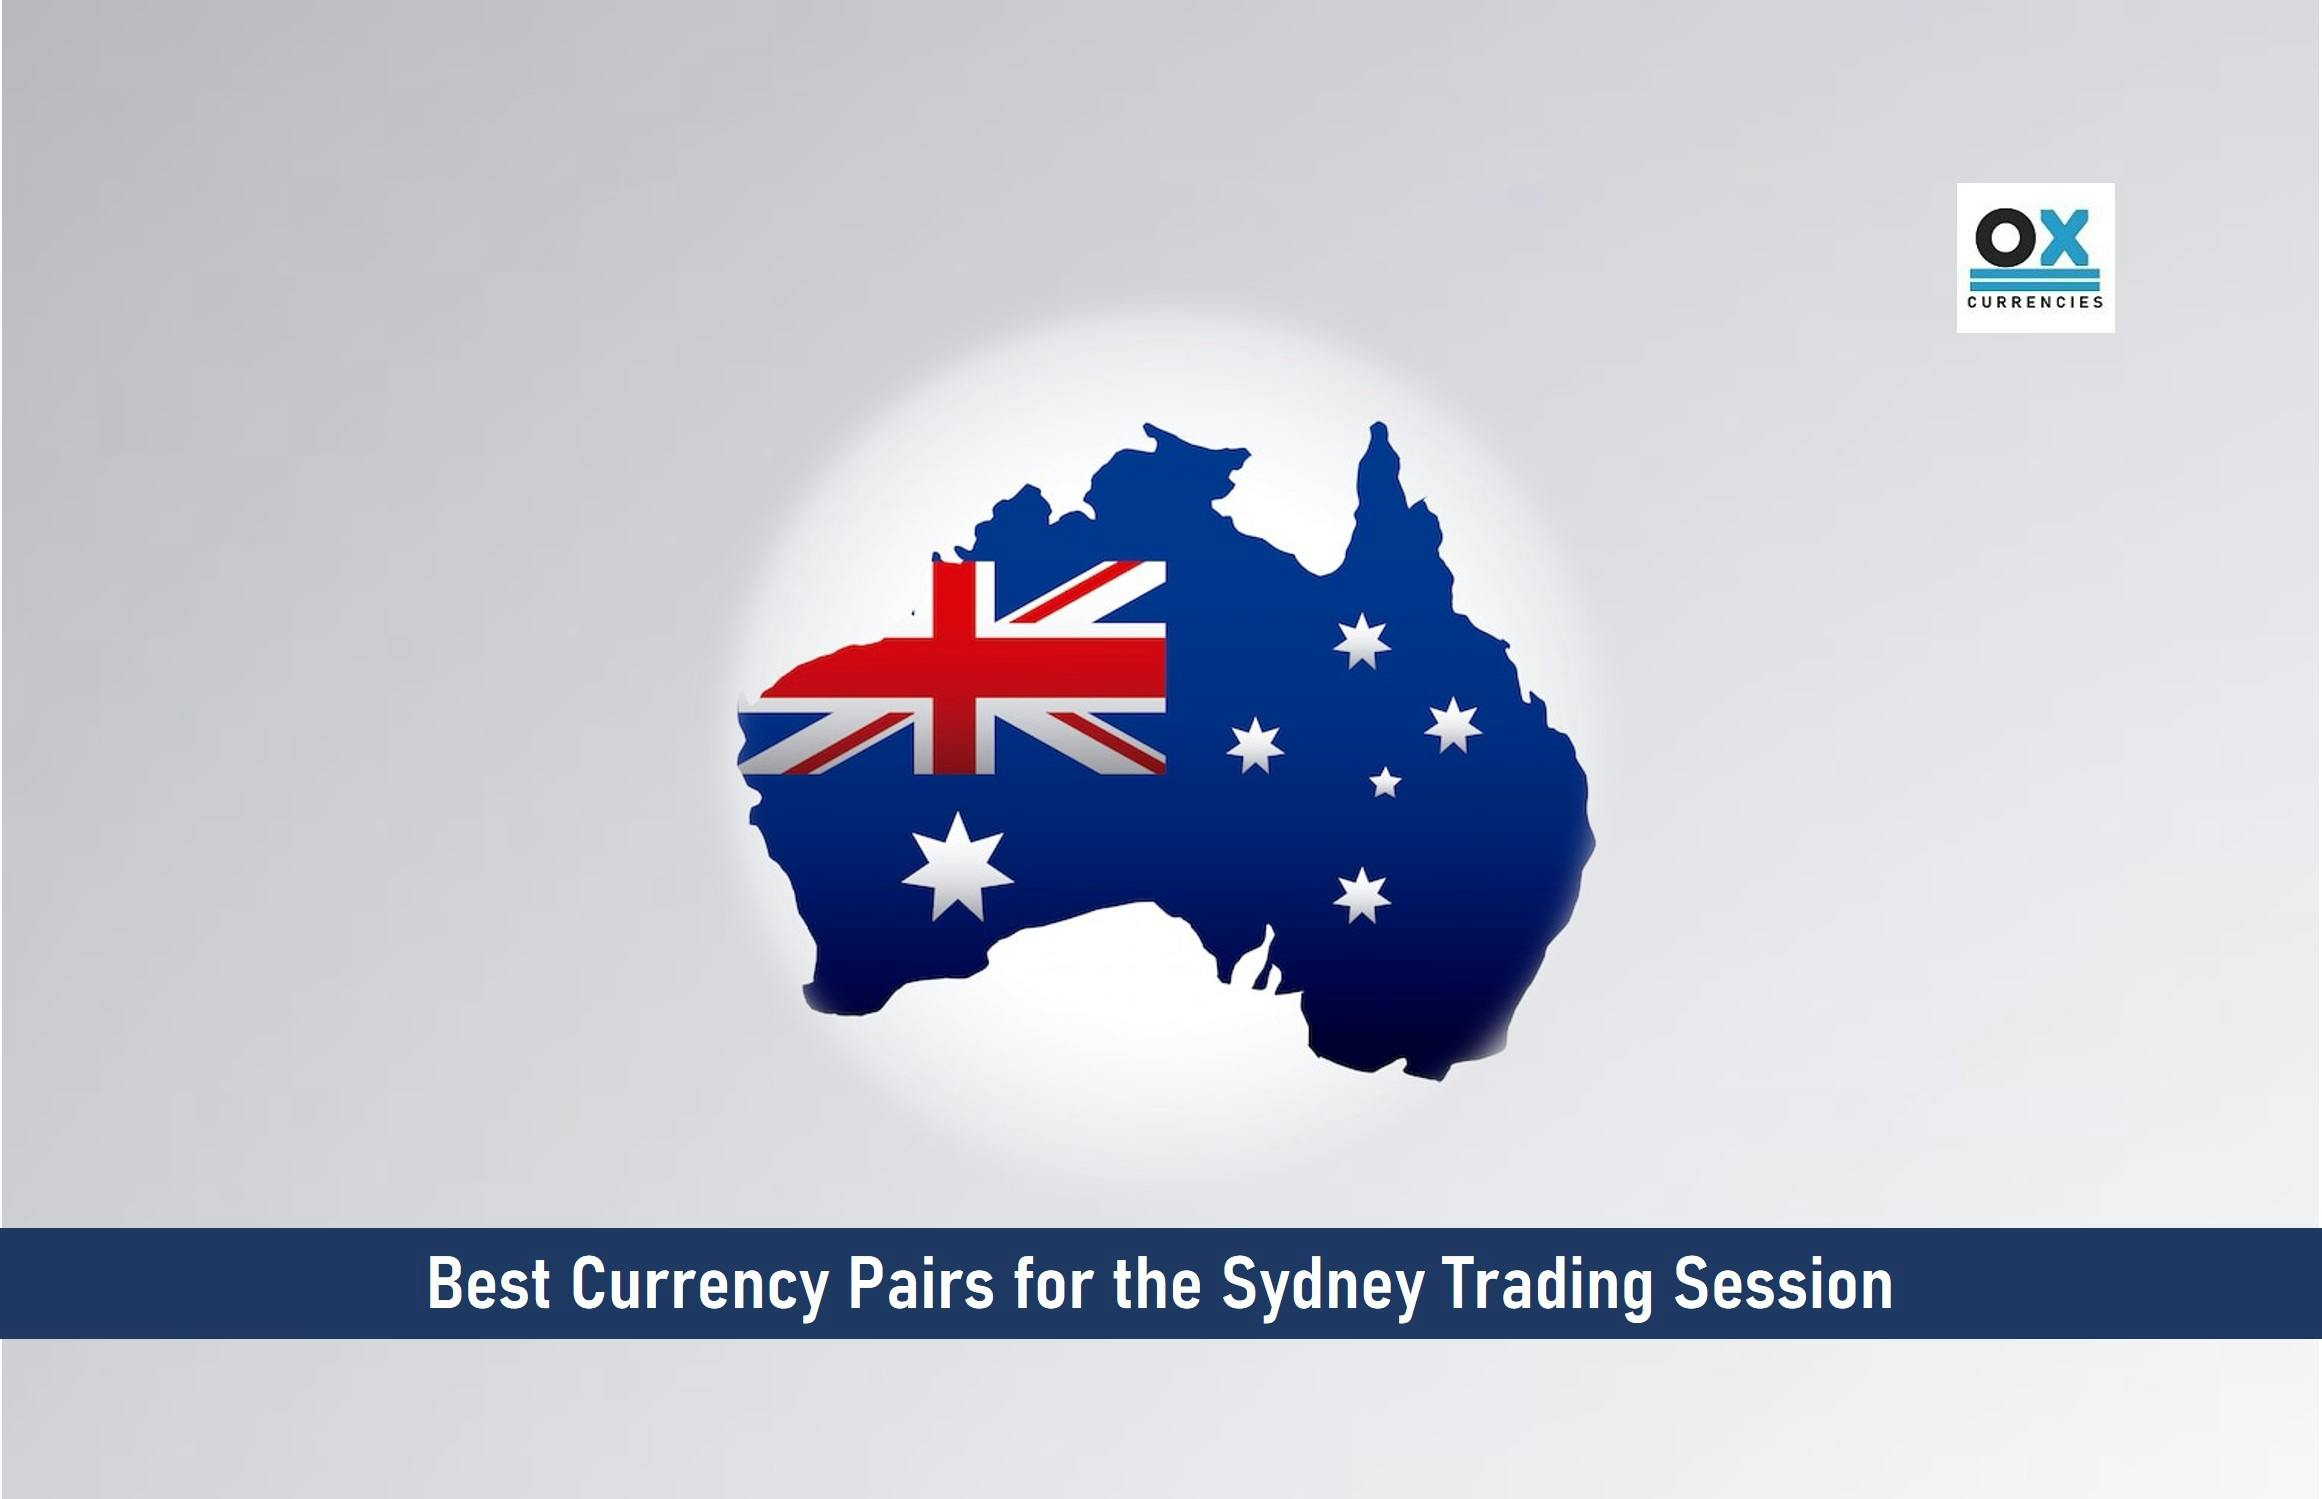 Best Currency Pairs for Sydney Trading Session